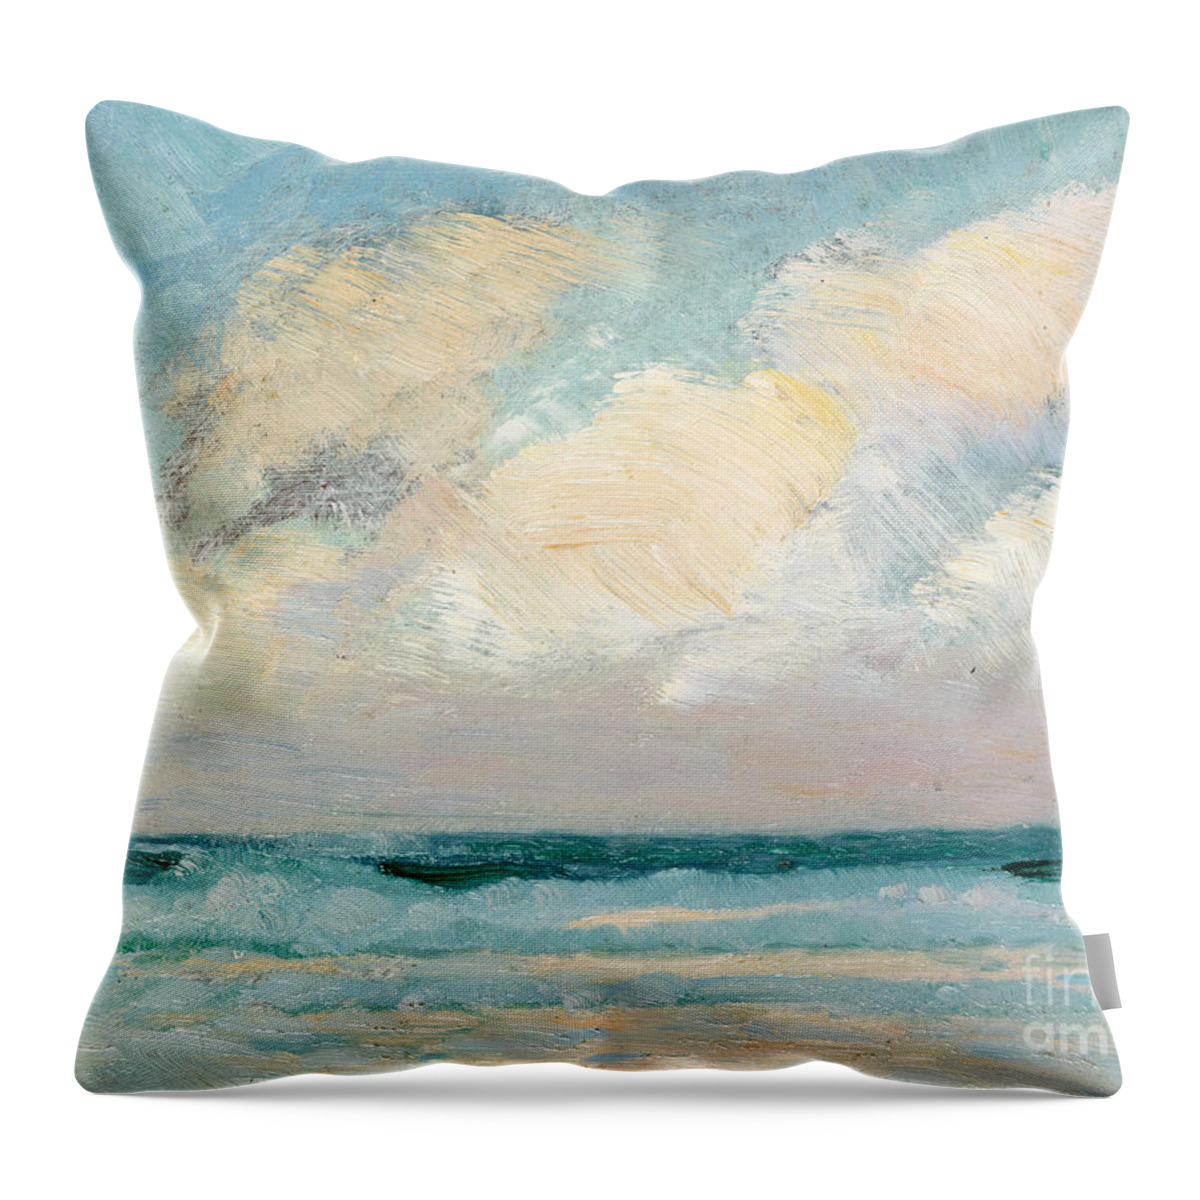 Seascape Throw Pillow featuring the painting Sea Study, Morning by AS Stokes